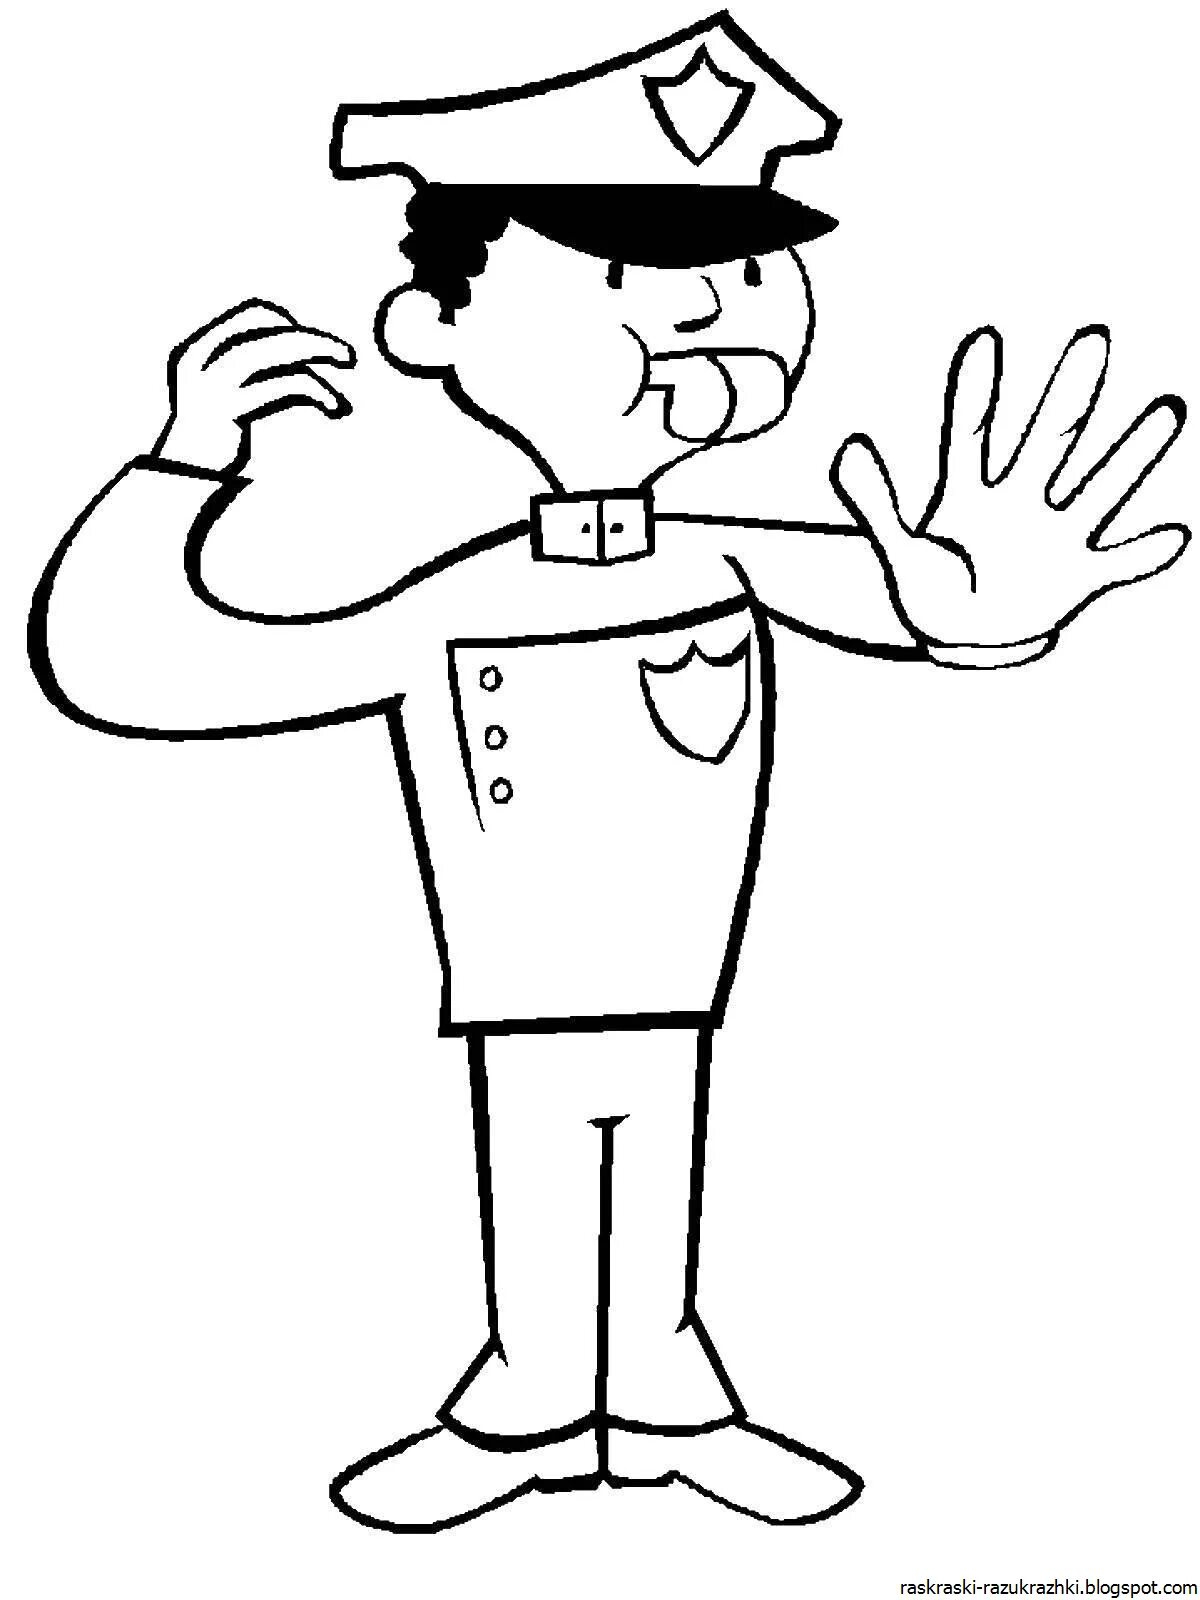 Animated traffic controller coloring page for kids